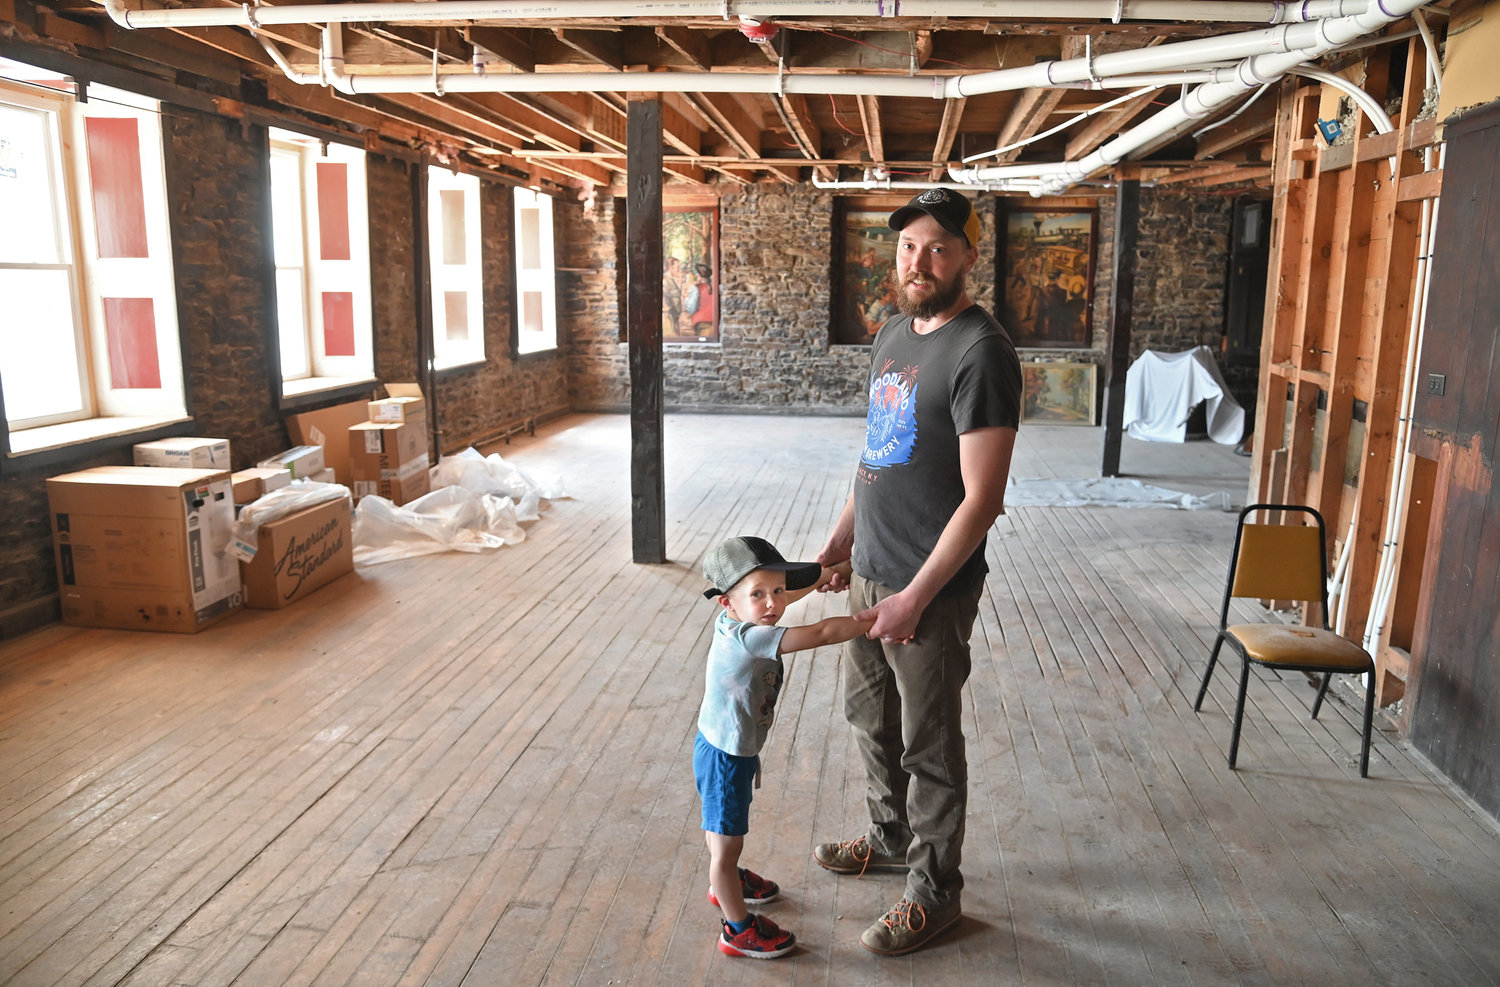 Keith Redhead pictured with his son Carl at the new tap room space on the first floor of the Hulbert House.